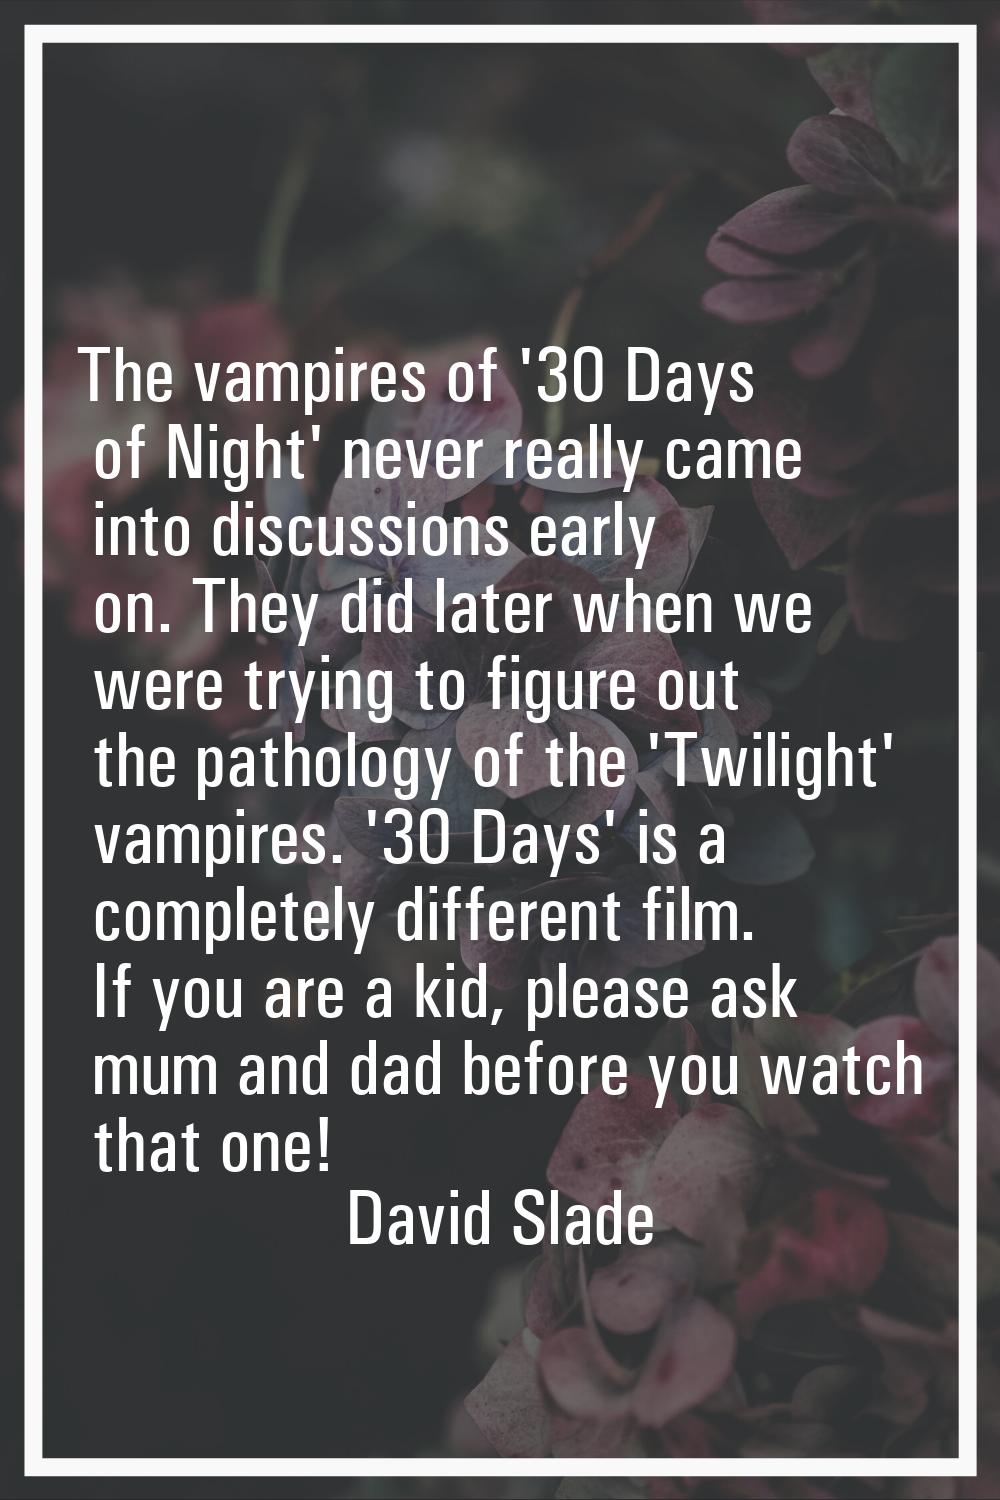 The vampires of '30 Days of Night' never really came into discussions early on. They did later when